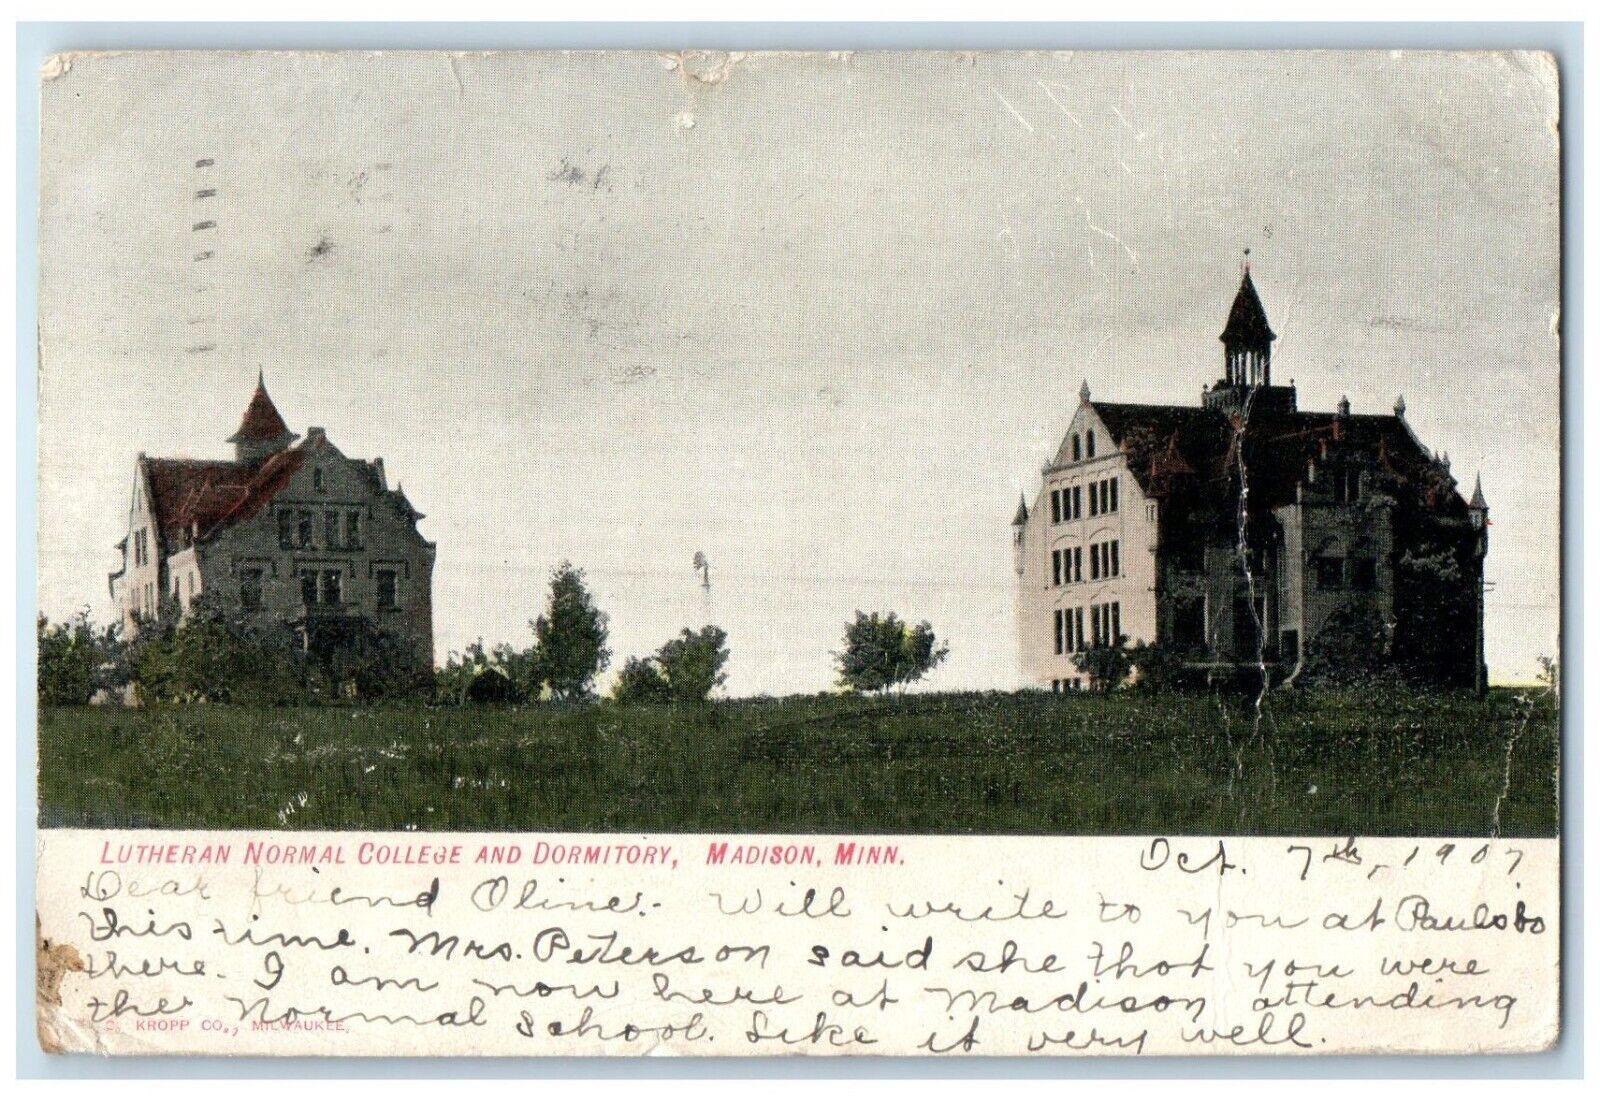 1907 Exterior View Lutheran Normal College Dormitory Madison Minnesota Postcard